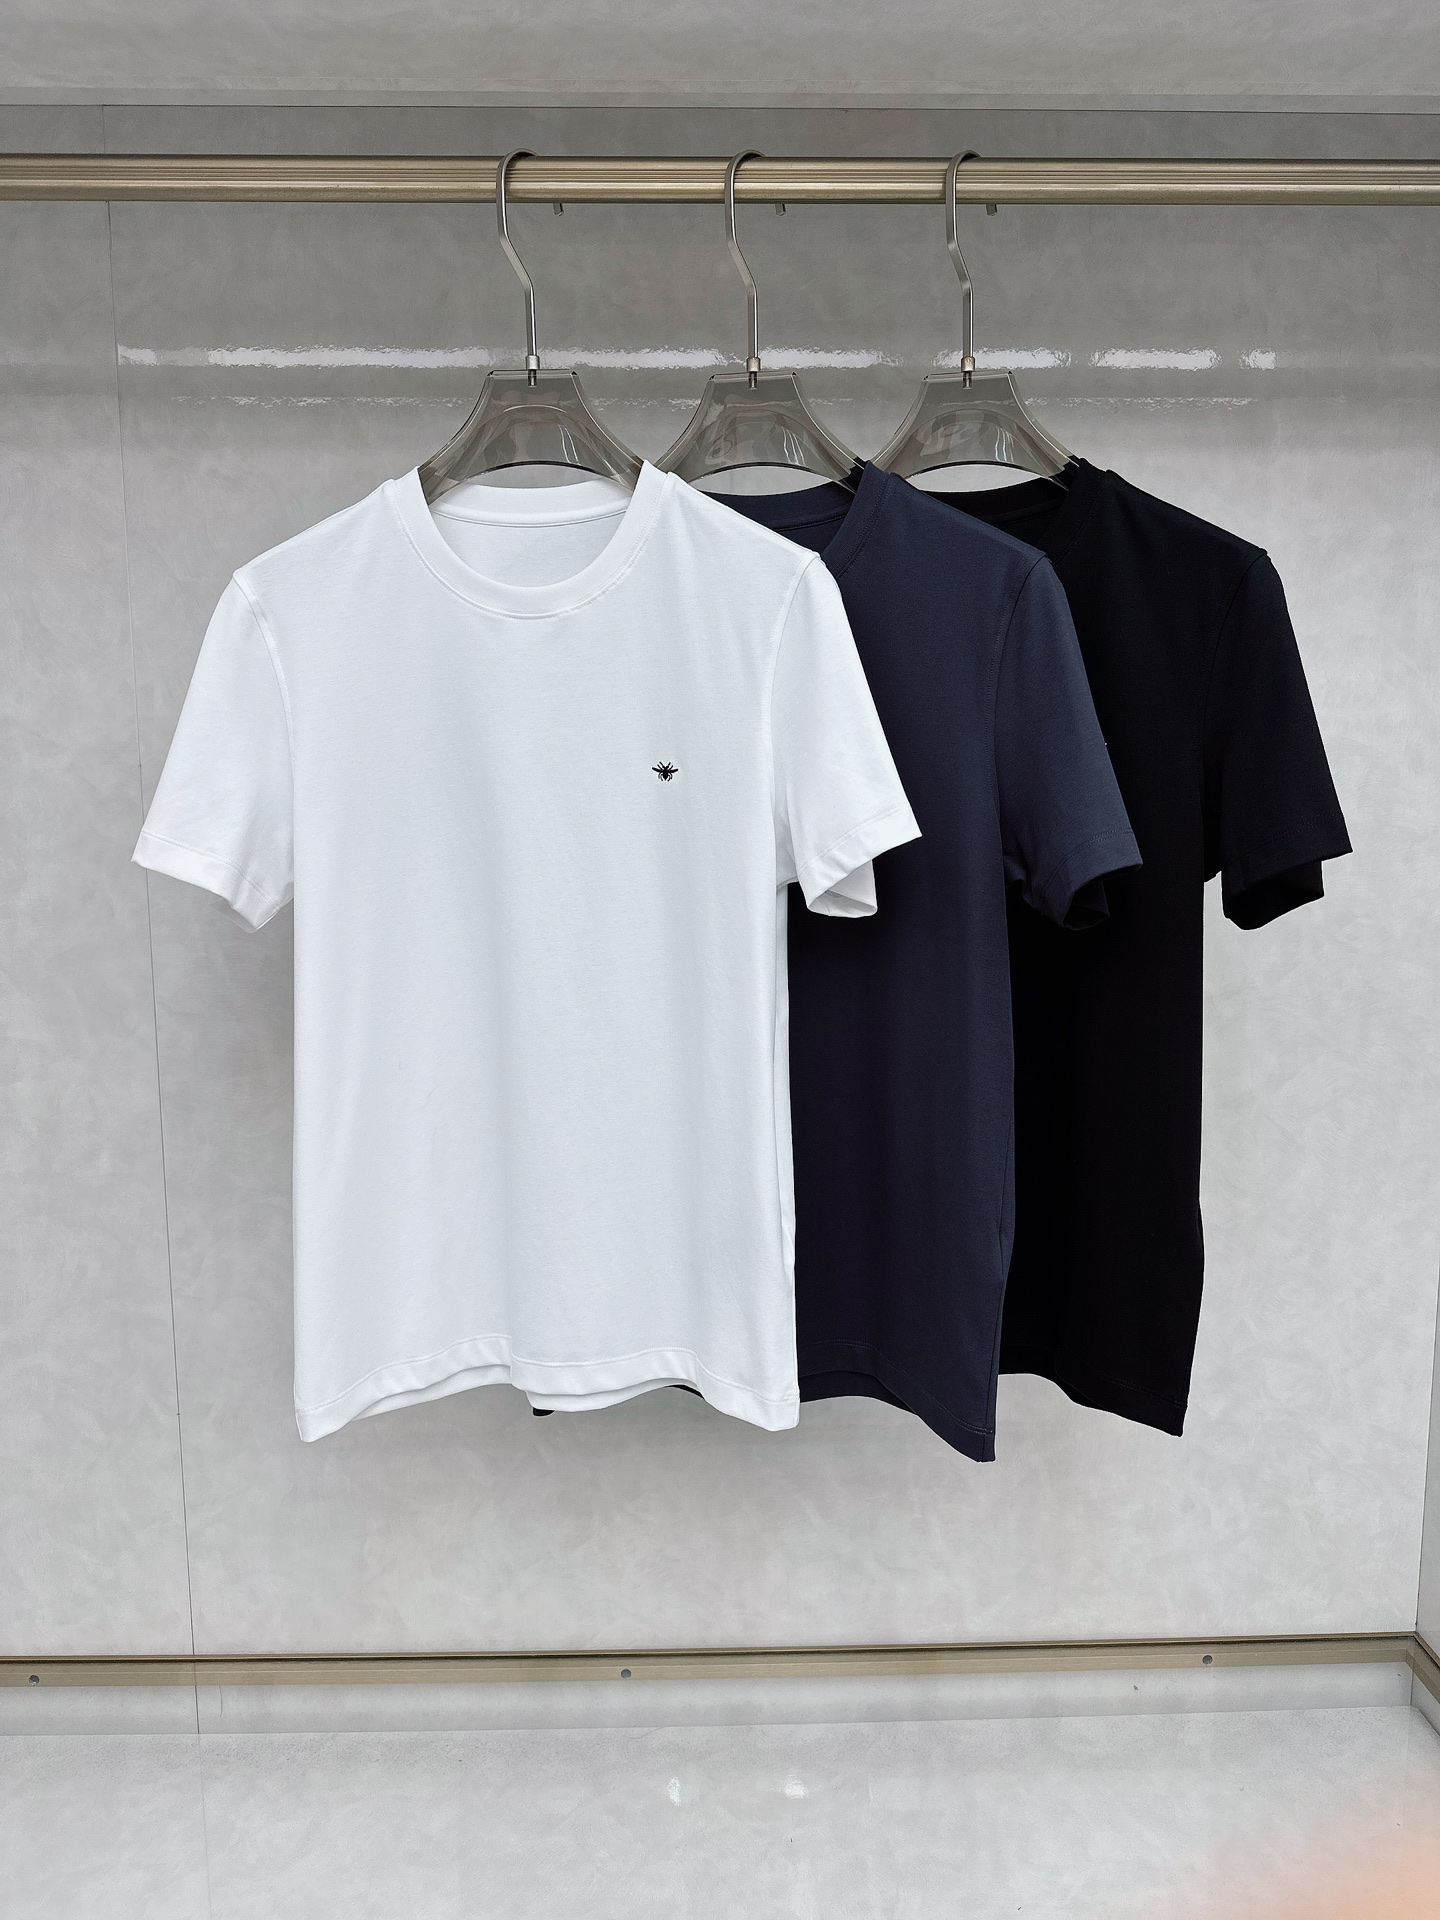 Dior Clothing T-Shirt Spring/Summer Collection Short Sleeve